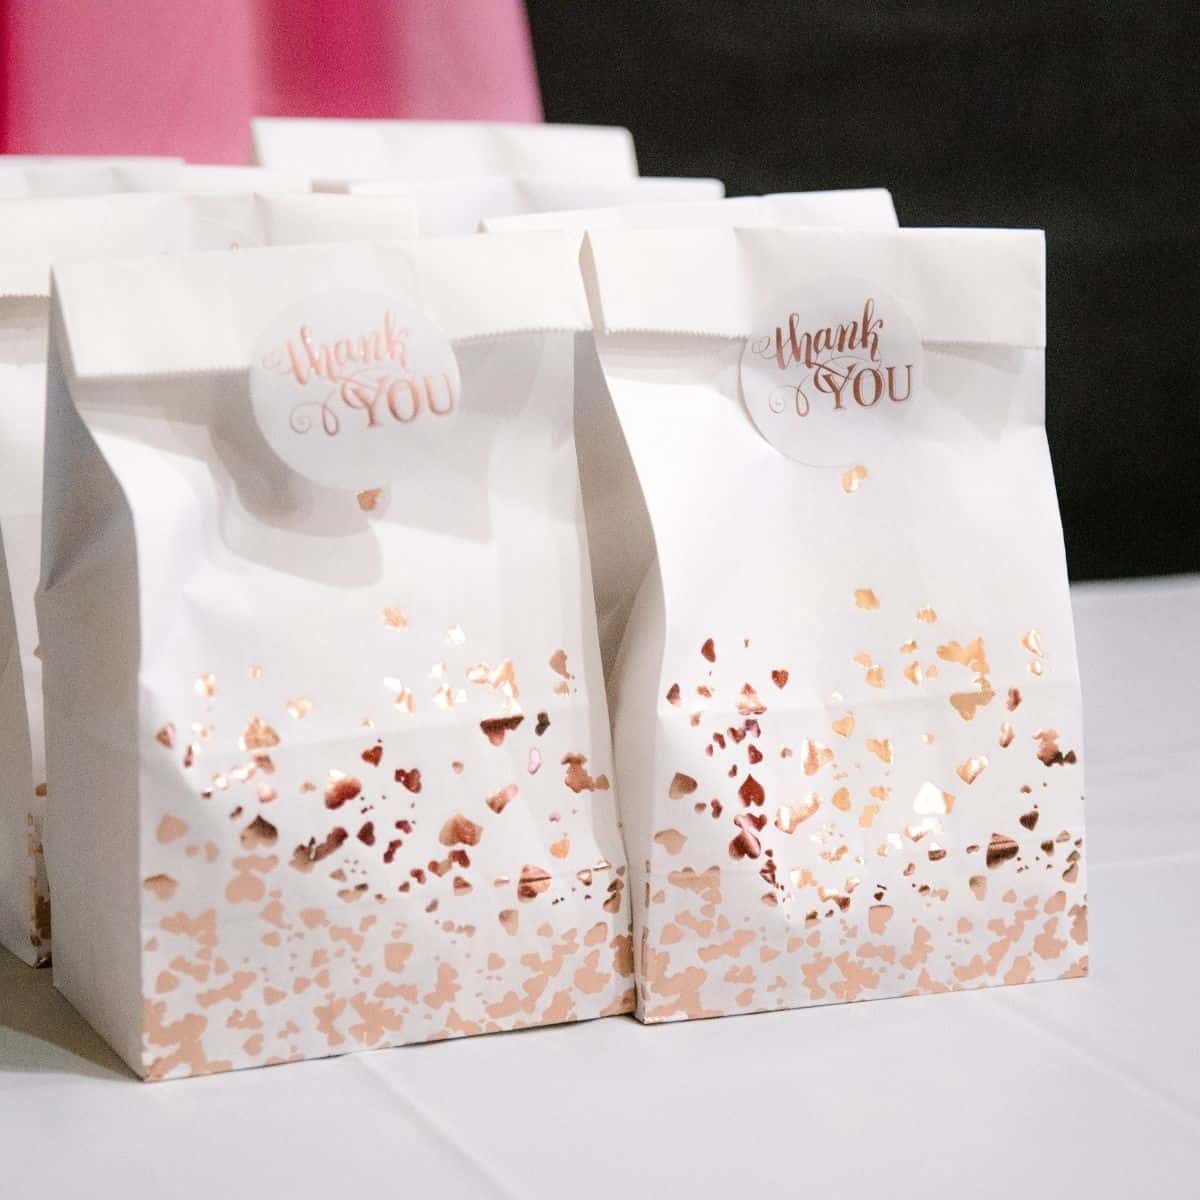 Sweet 16 Party Favor Ideas For Her